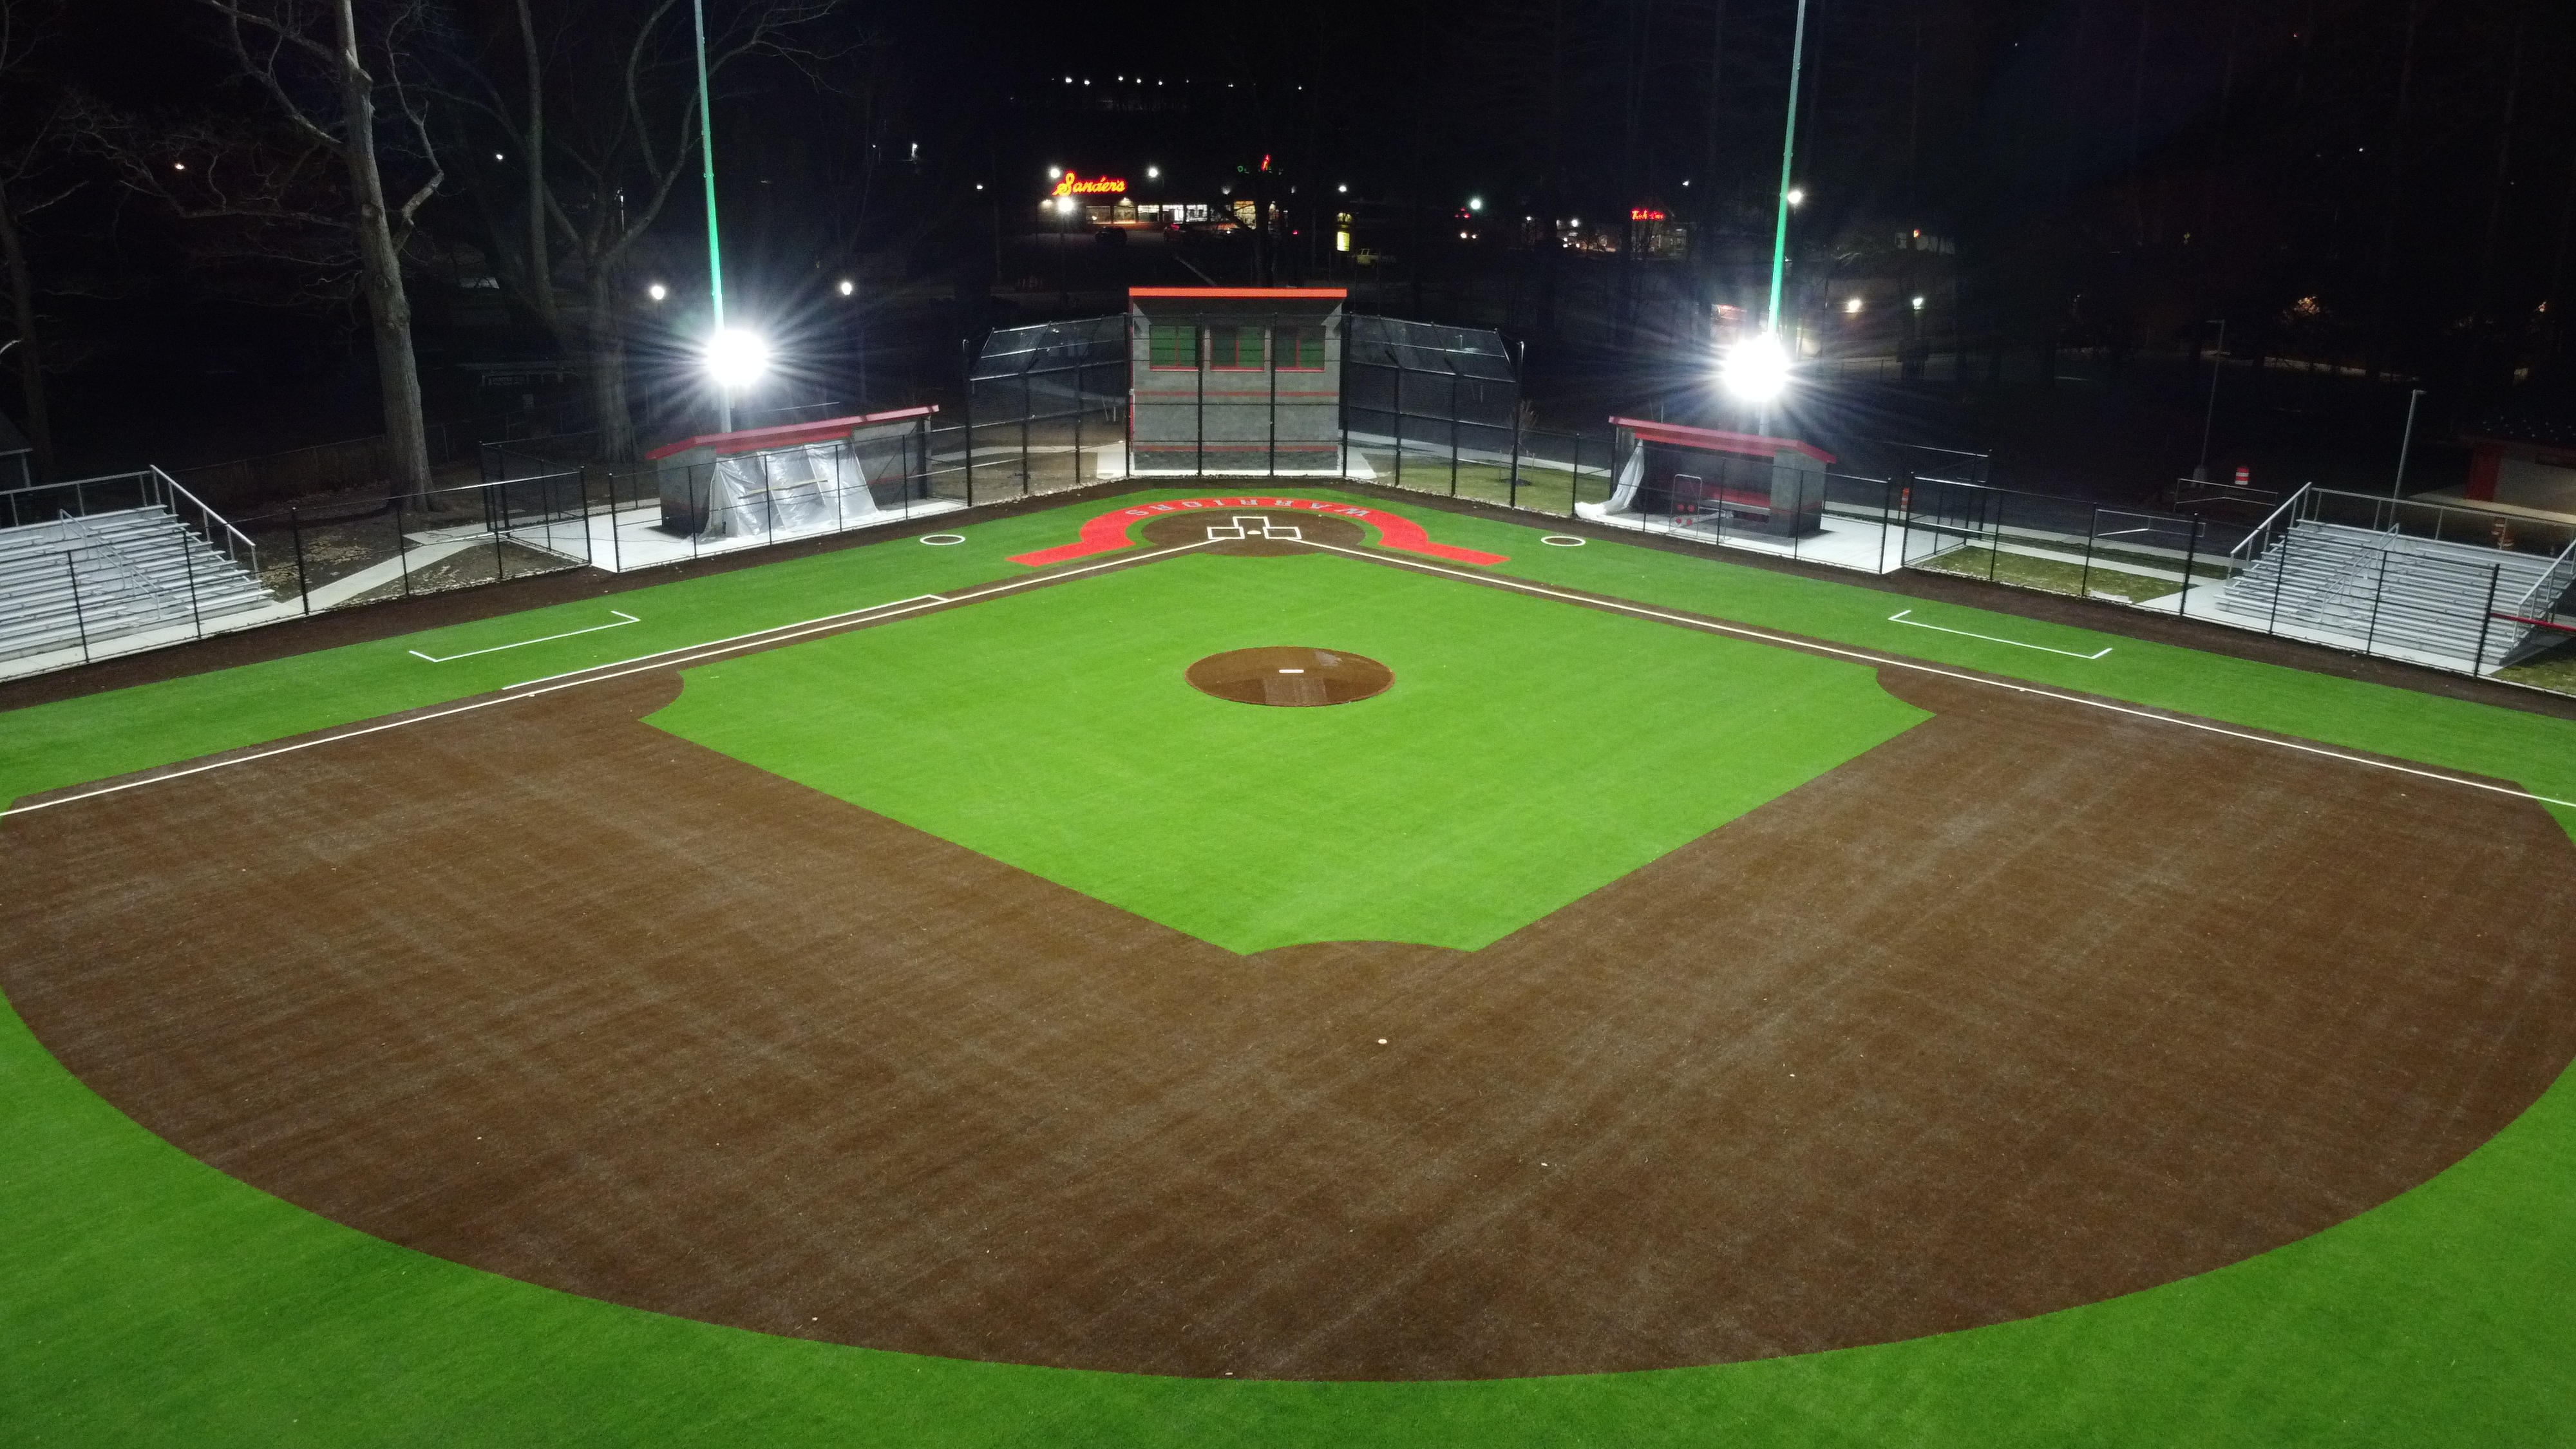 Baseball to home plate aerial view